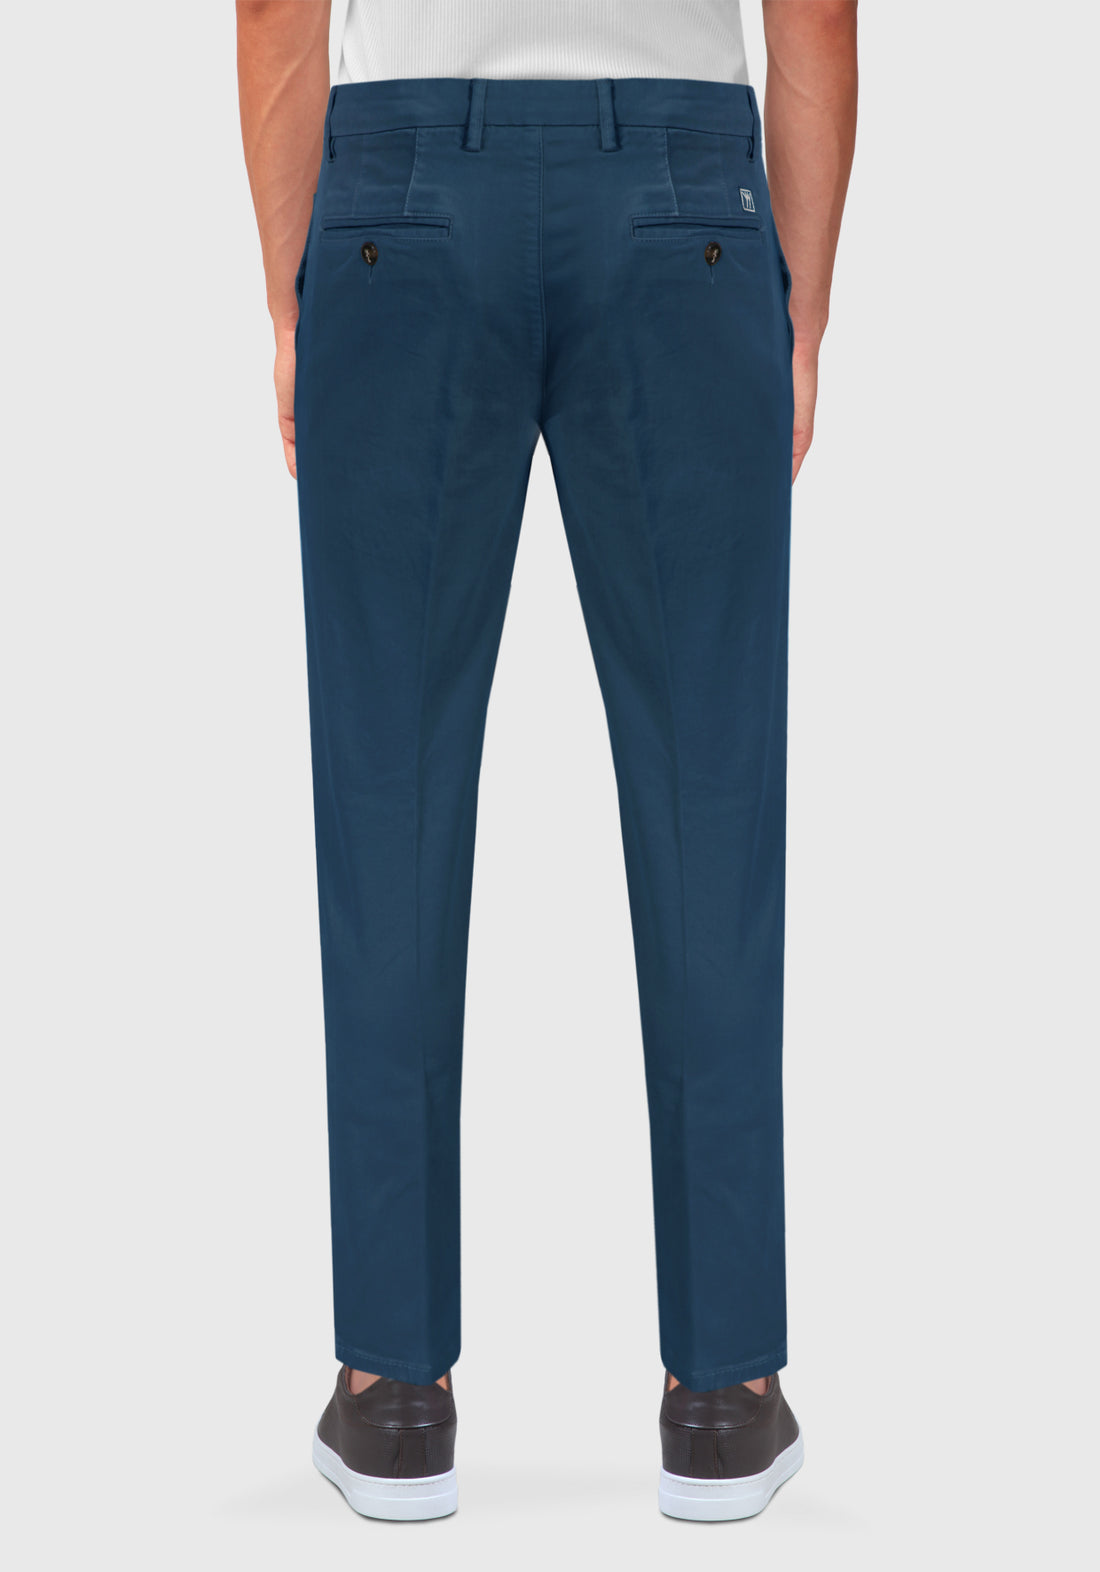 America Pocket Chinos Trousers Warm cotton - Teal